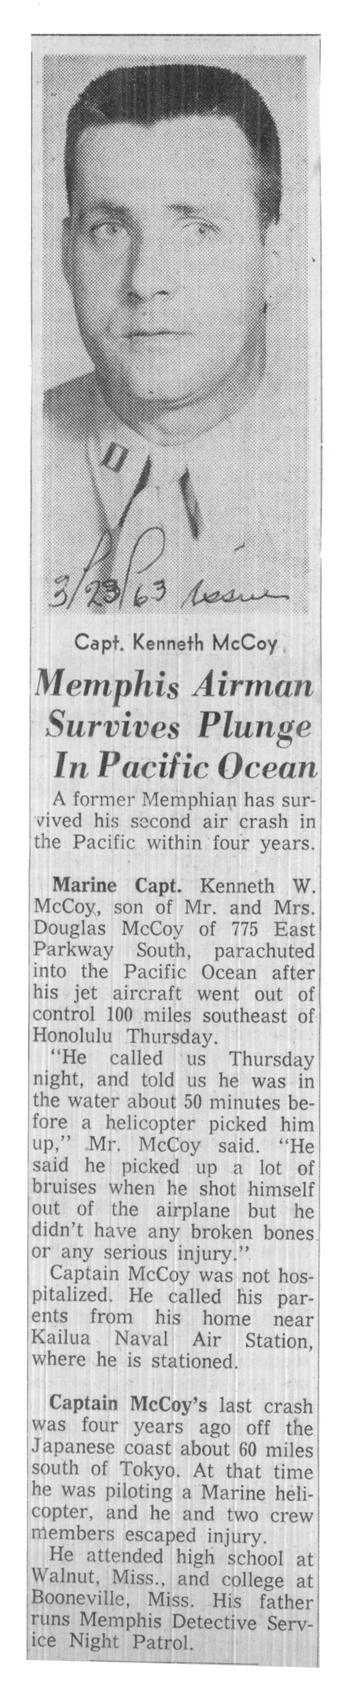 Memphis newspaper article describing how Marine aviator Capt. Ken McCoy was rescued from the ocean after ejecting from an A-4 Skyhawk